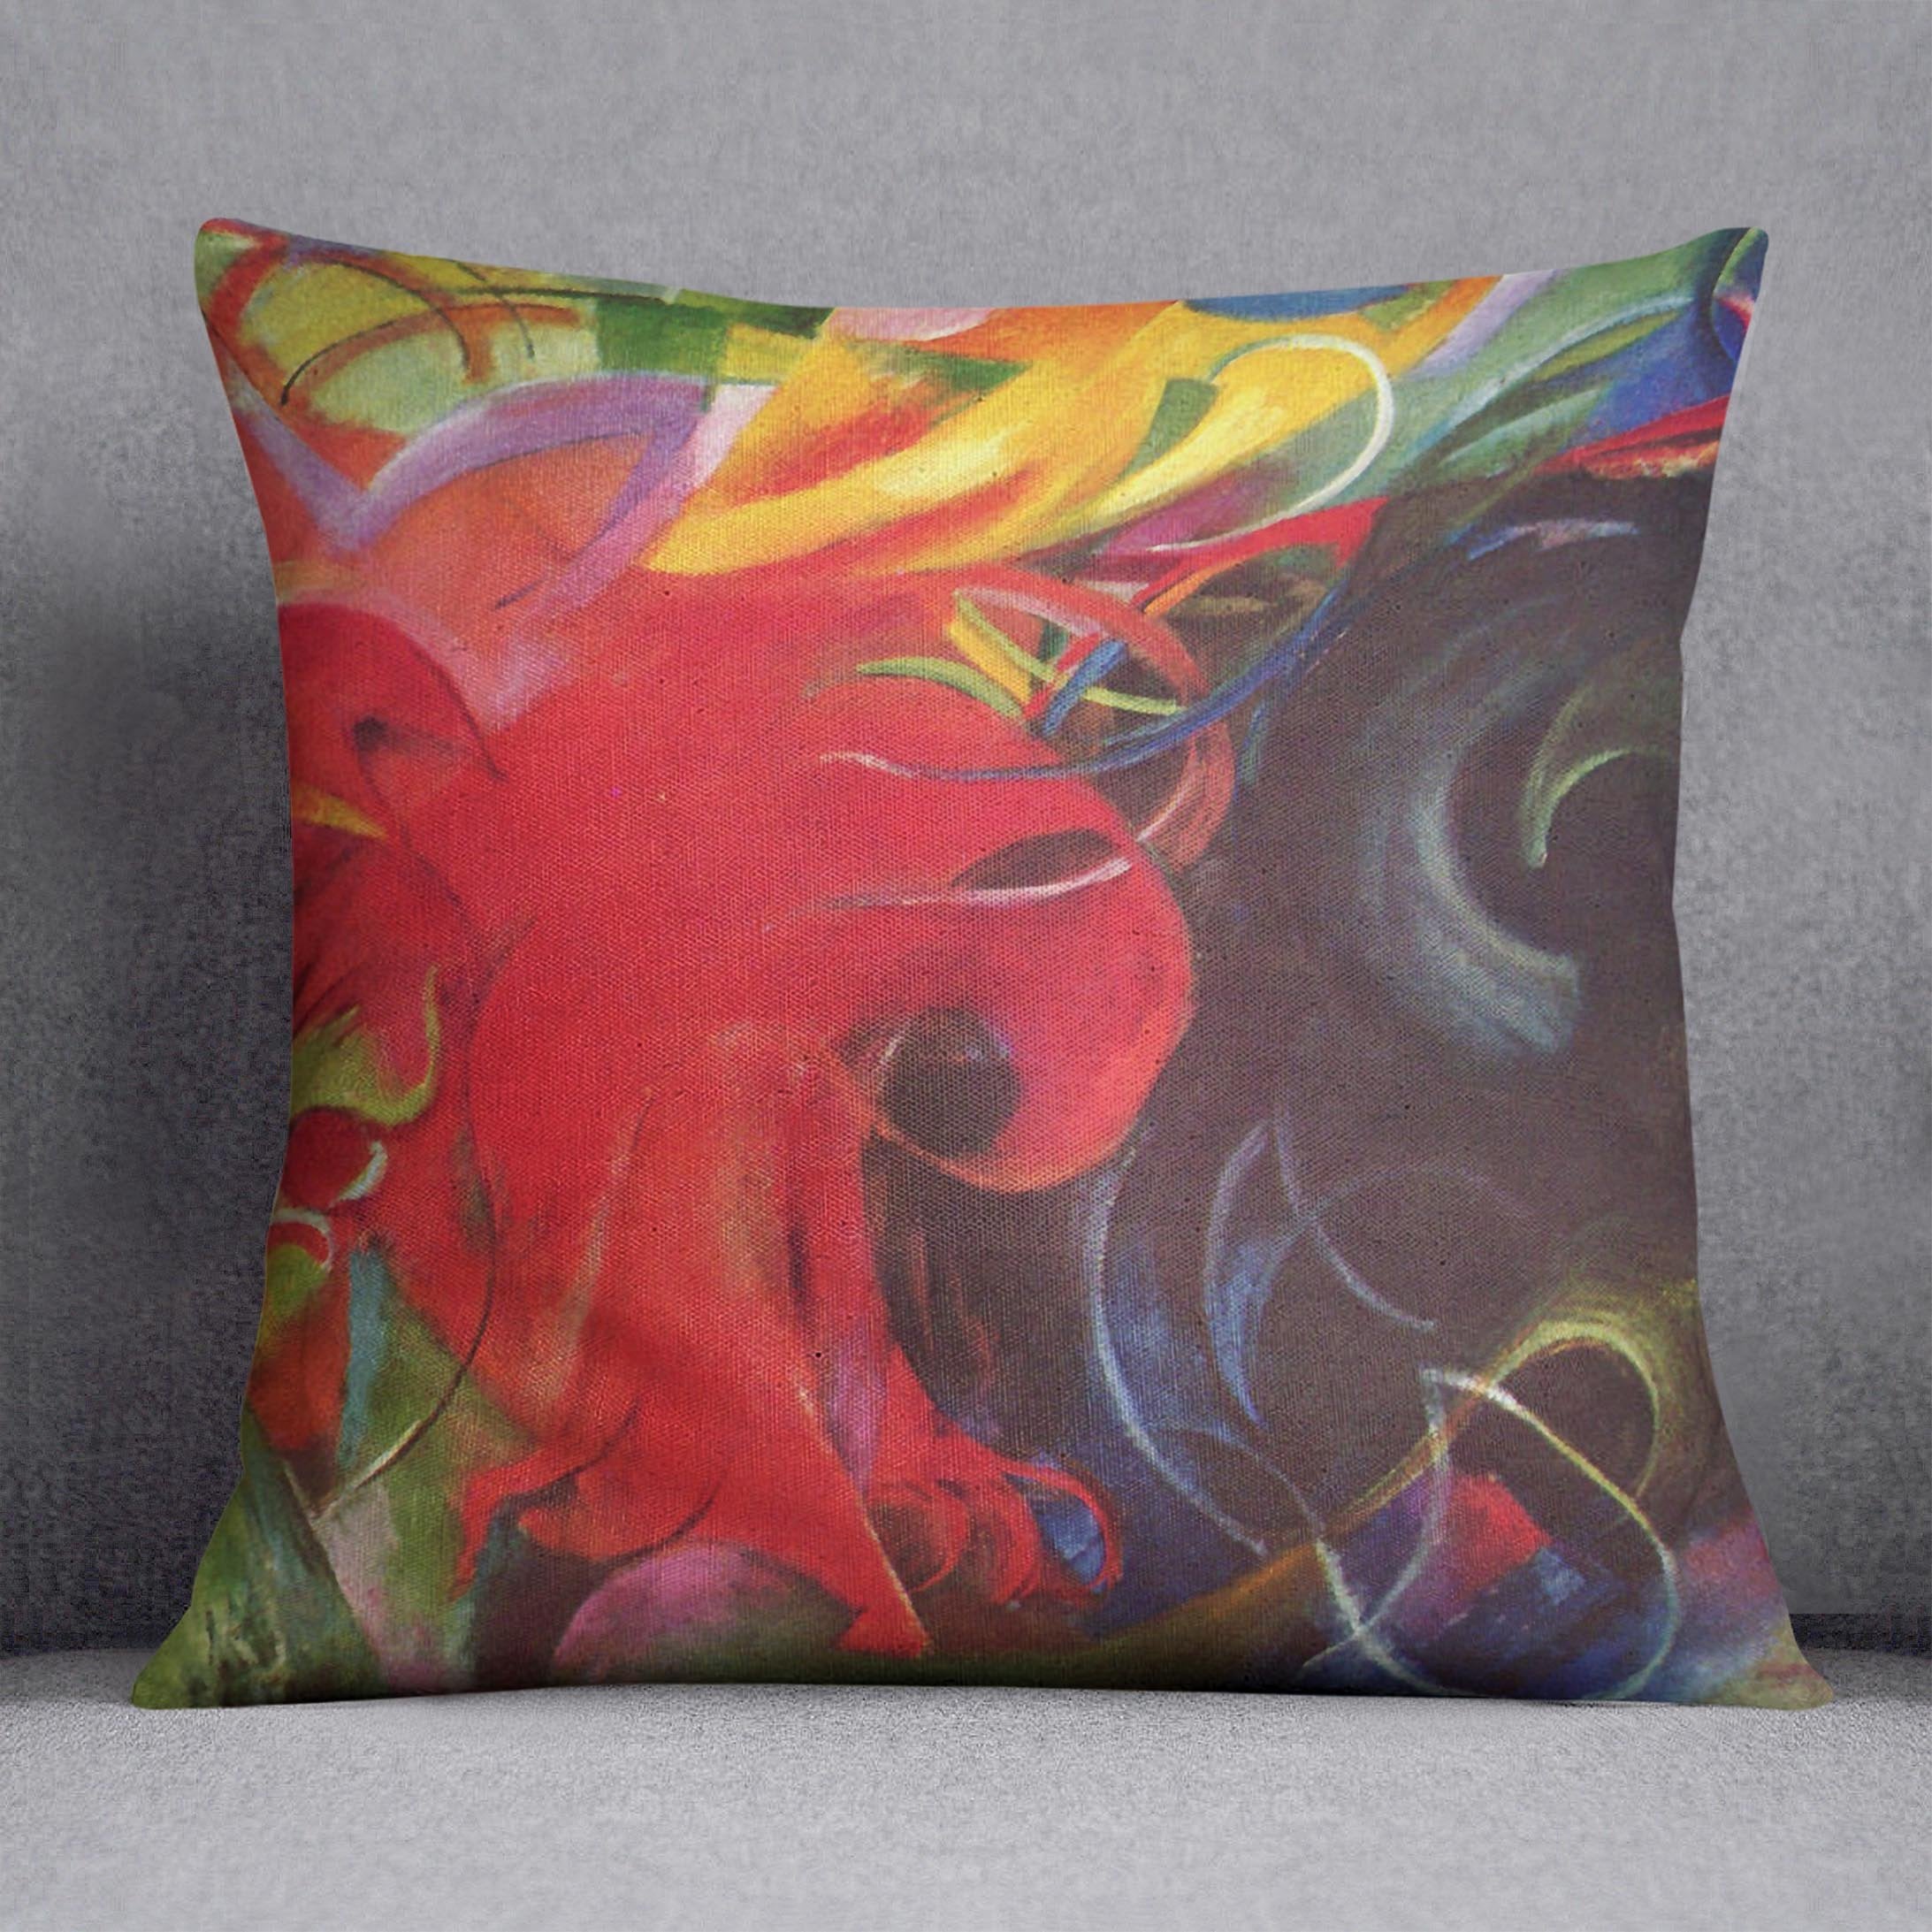 Fighting forms by Franz Marc Throw Pillow